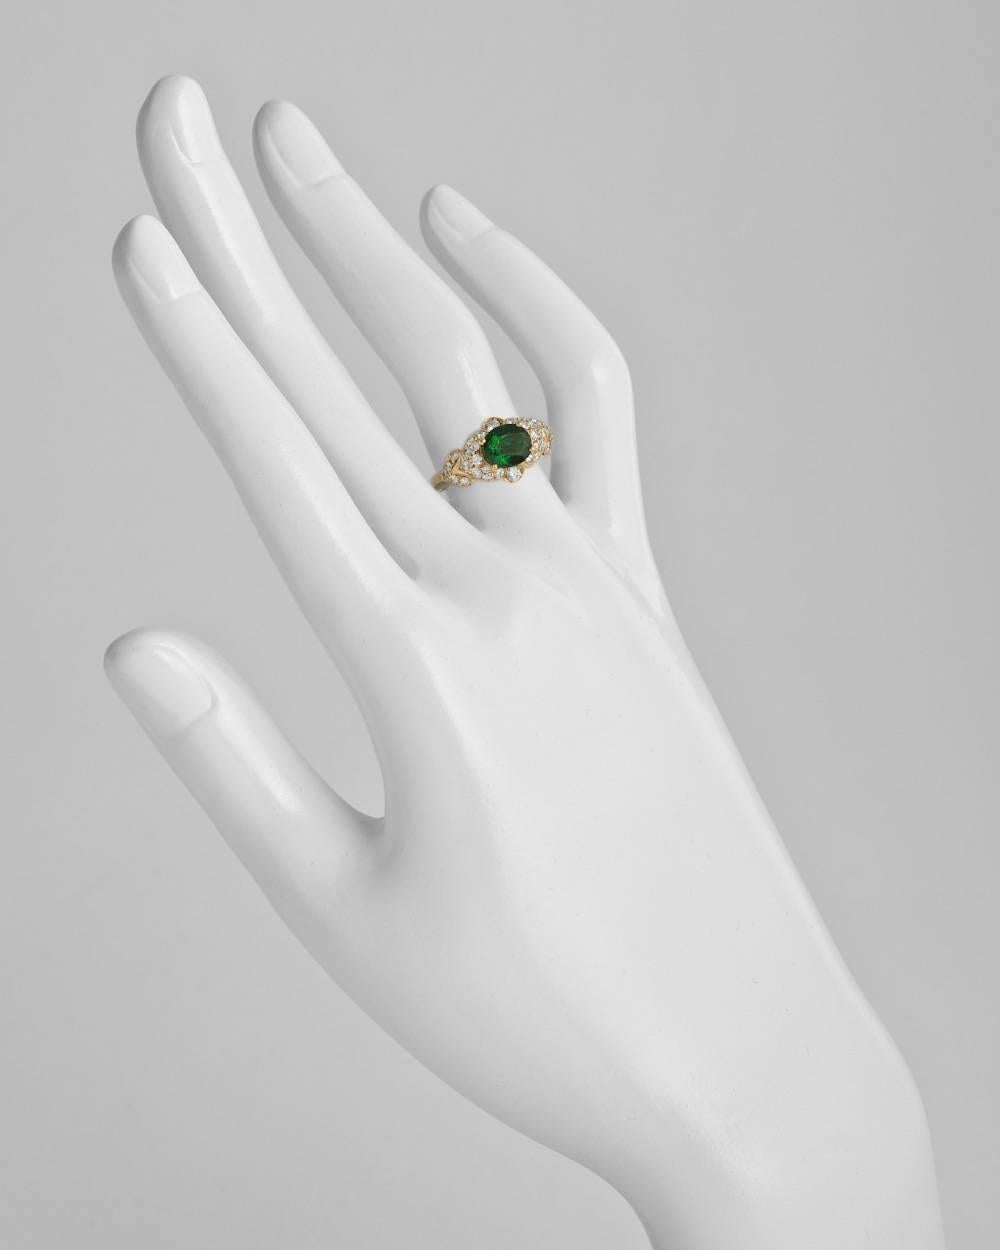 Tsavorite and diamond dress ring, centering on an oval-shaped tsavorite garnet weighing approximately 1.37 carats, with 'stepped' diamond-set surround and shoulders, the 32 round diamond accents weighing approximately 0.64 total carats, mounted in